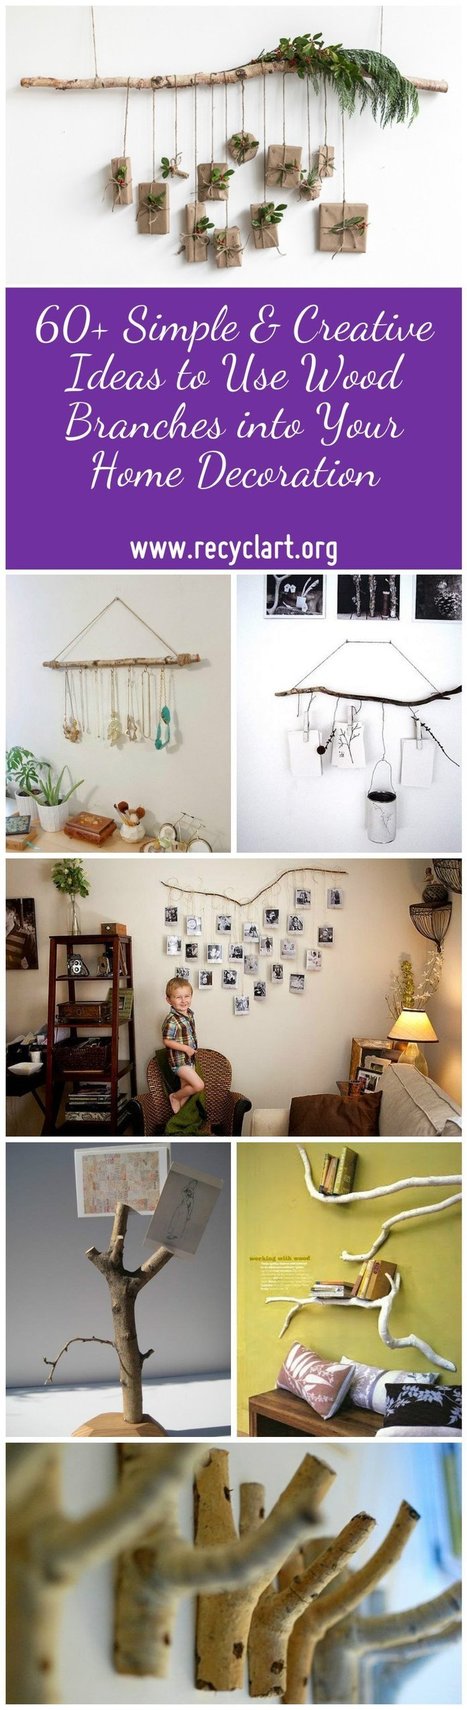 60+ Simple & Creative Ideas to Use Wood Branches into Your Home Decoration | 1001 Recycling Ideas ! | Scoop.it